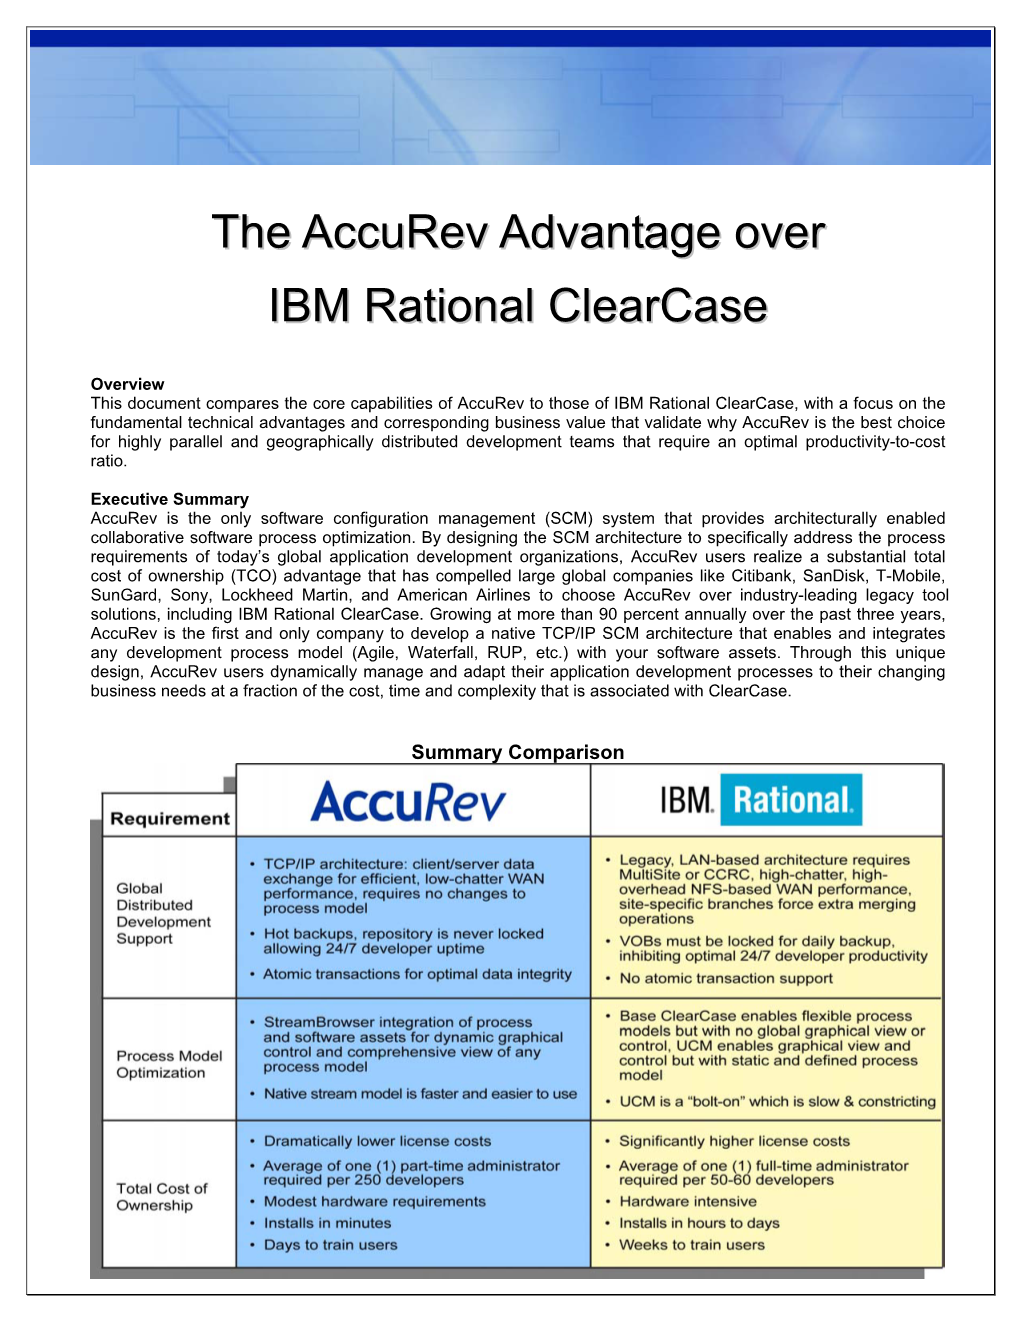 The Accurev Advantage Over IBM Rational Clearcase in Contrast, Clearcase’S Architecture Does Not Support Atomic Transactions